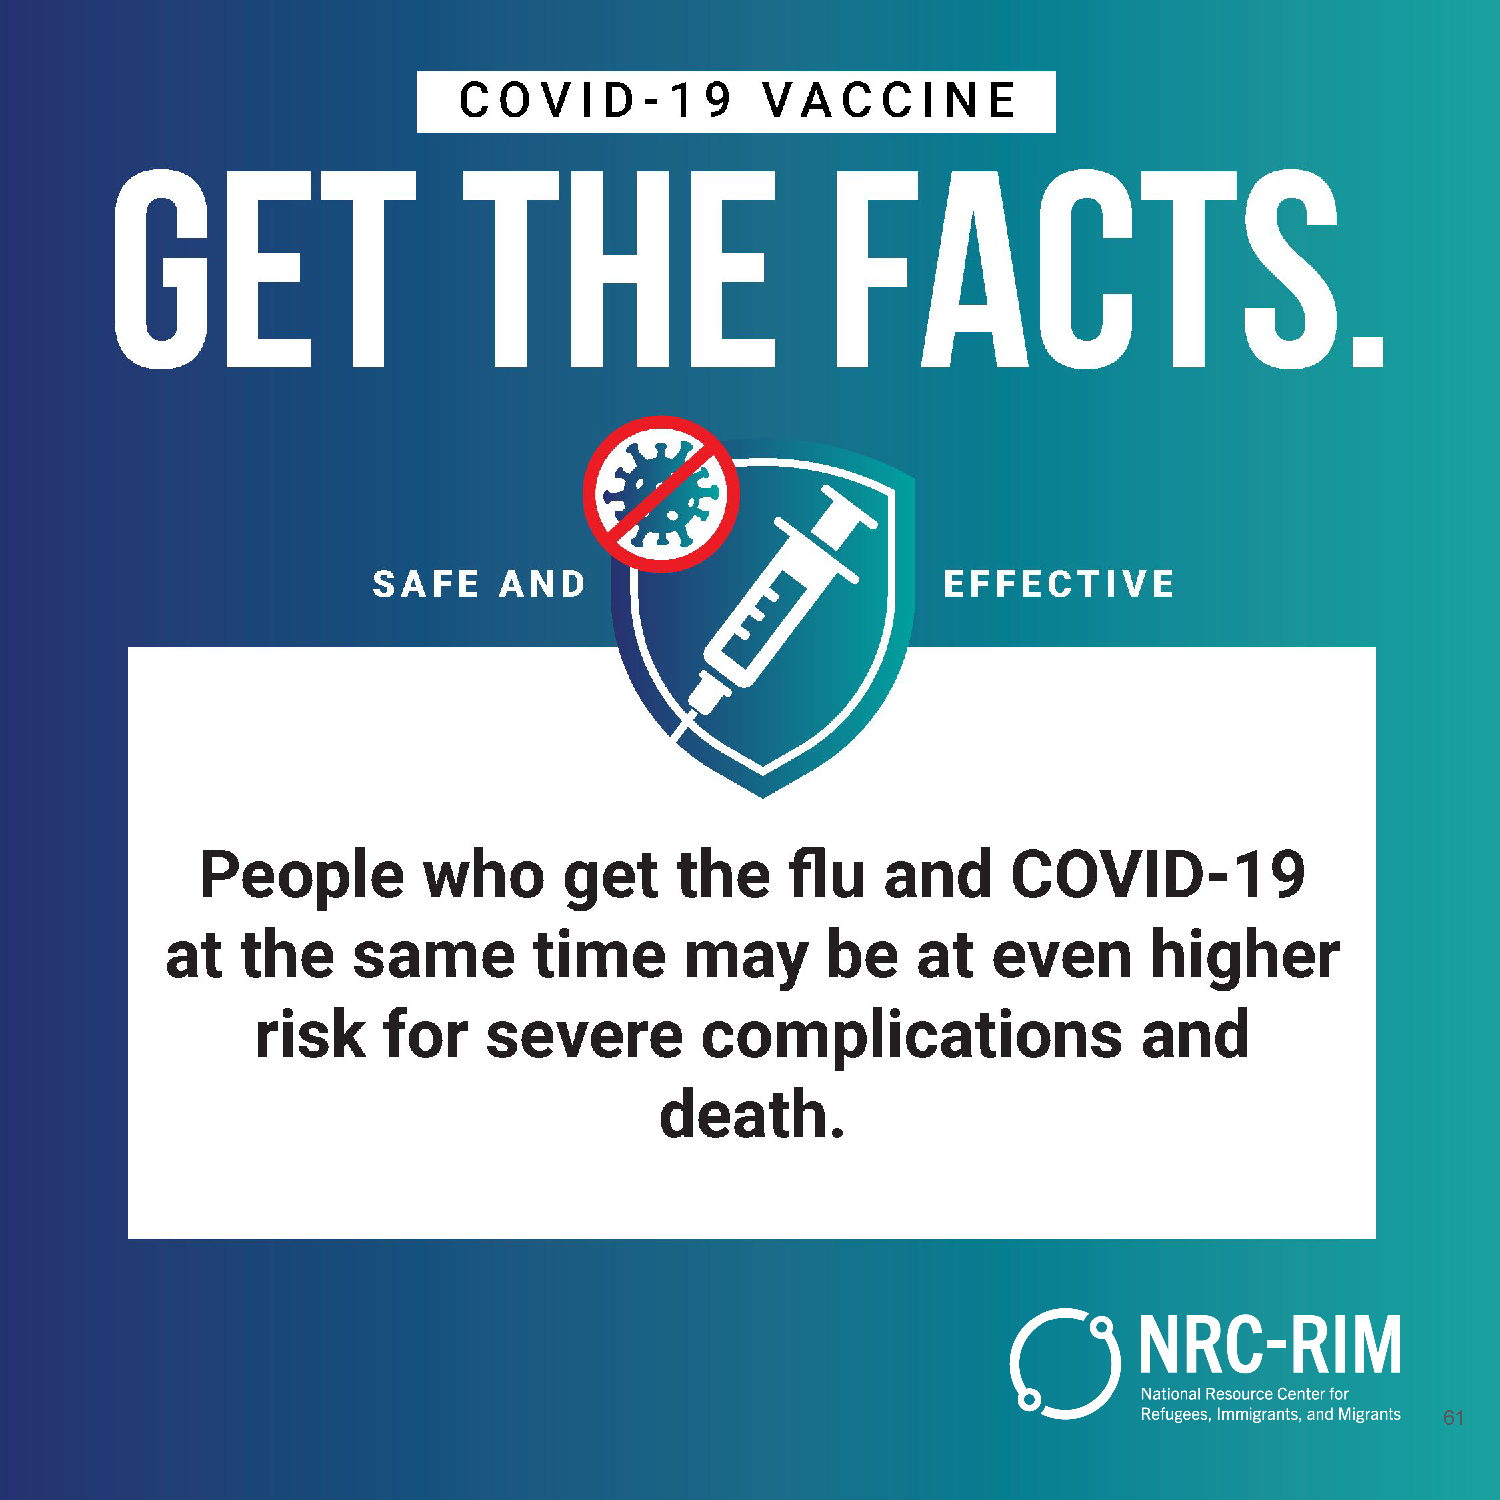 People who get the flu and COVID-19 at the same time may be at even higher risk for severe complications and death.